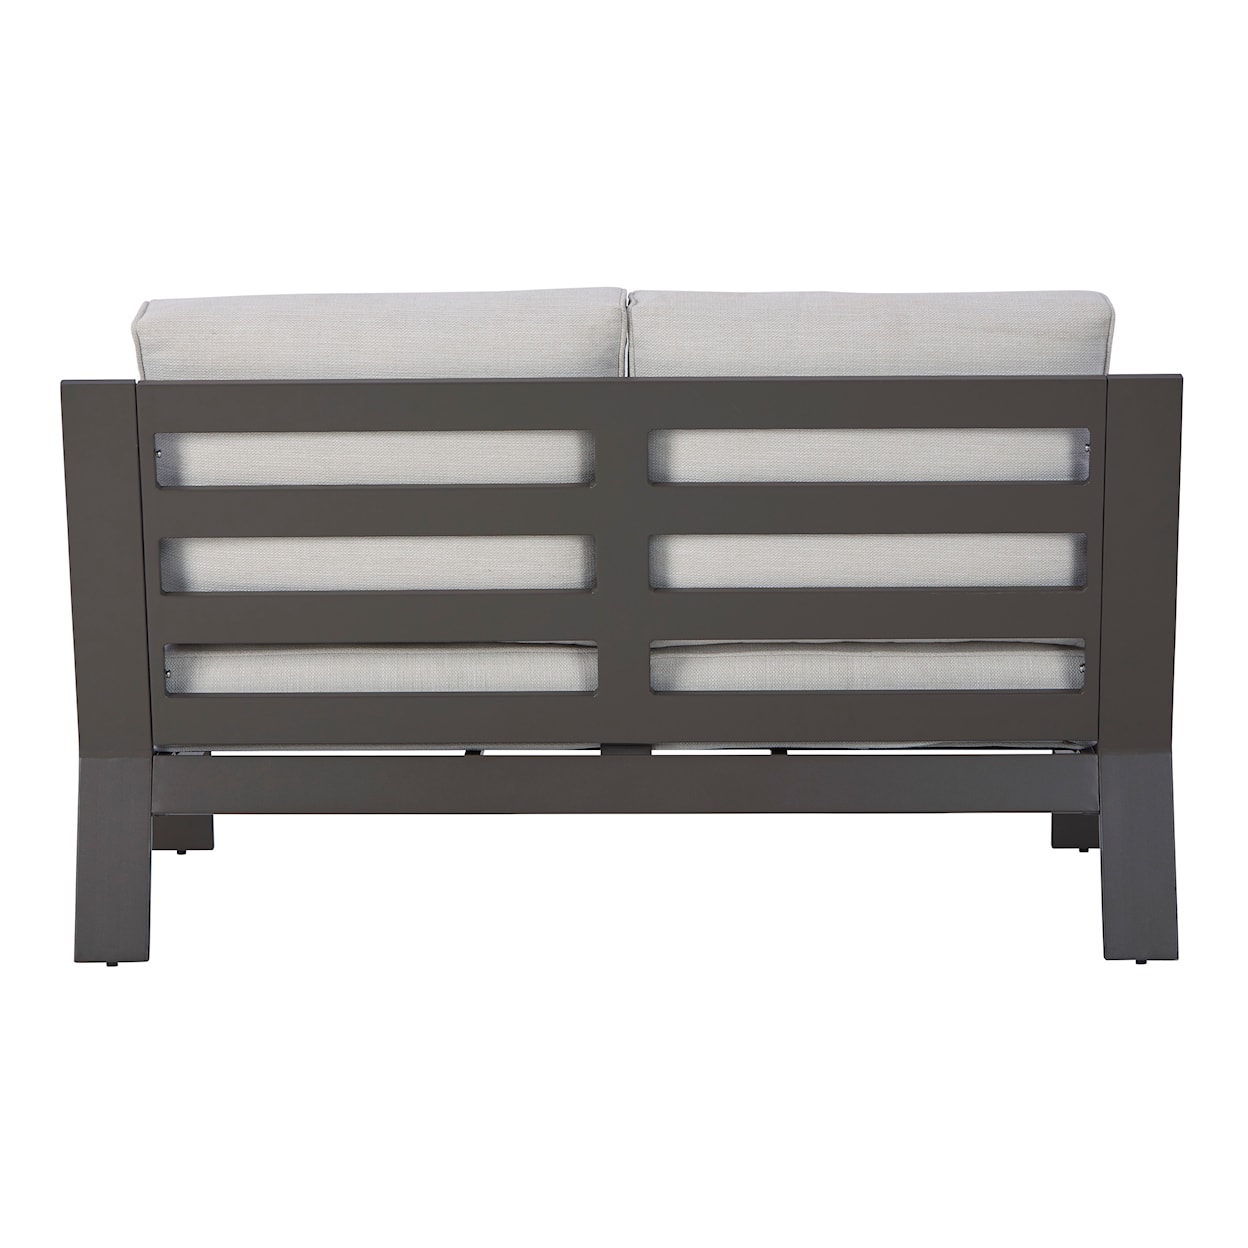 Signature Design by Ashley Tropicava Outdoor Loveseat with Cushion